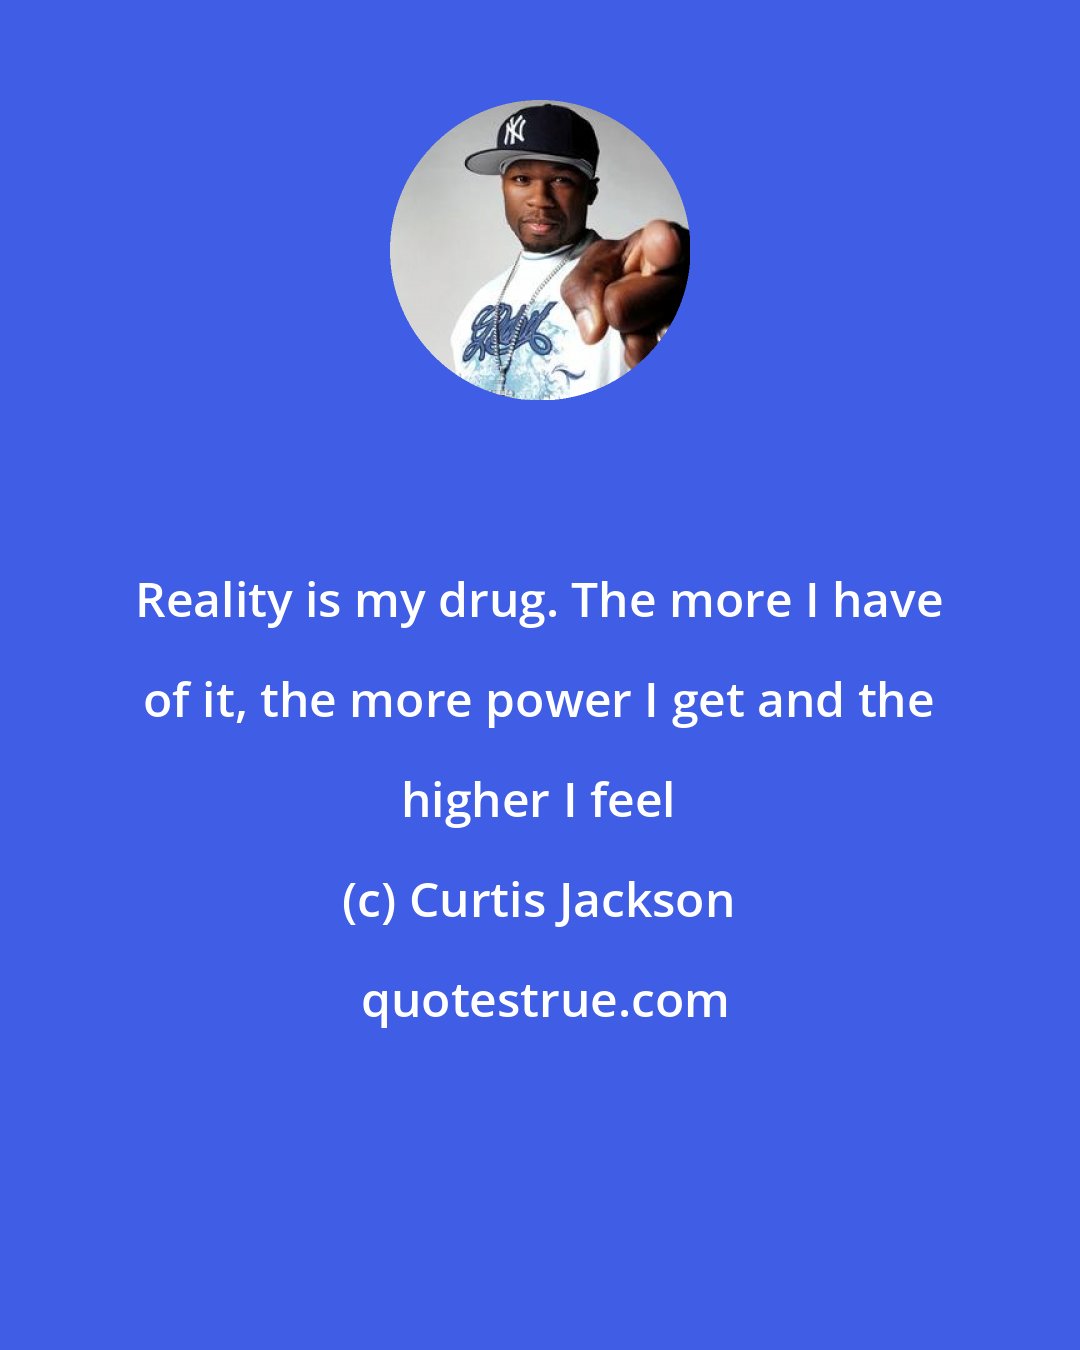 Curtis Jackson: Reality is my drug. The more I have of it, the more power I get and the higher I feel